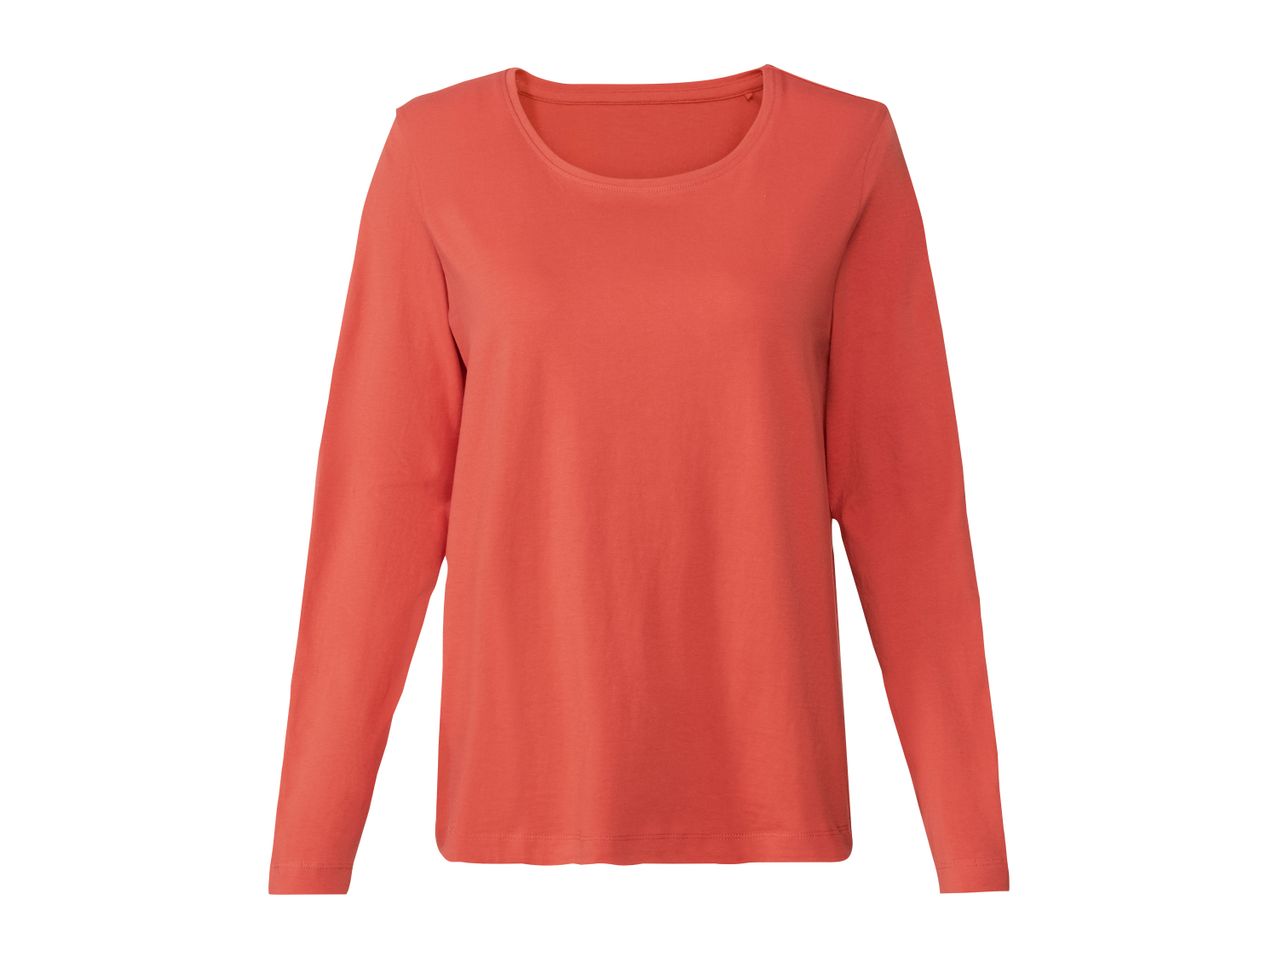 Go to full screen view: Ladies’ Long Sleeve Top - Image 5